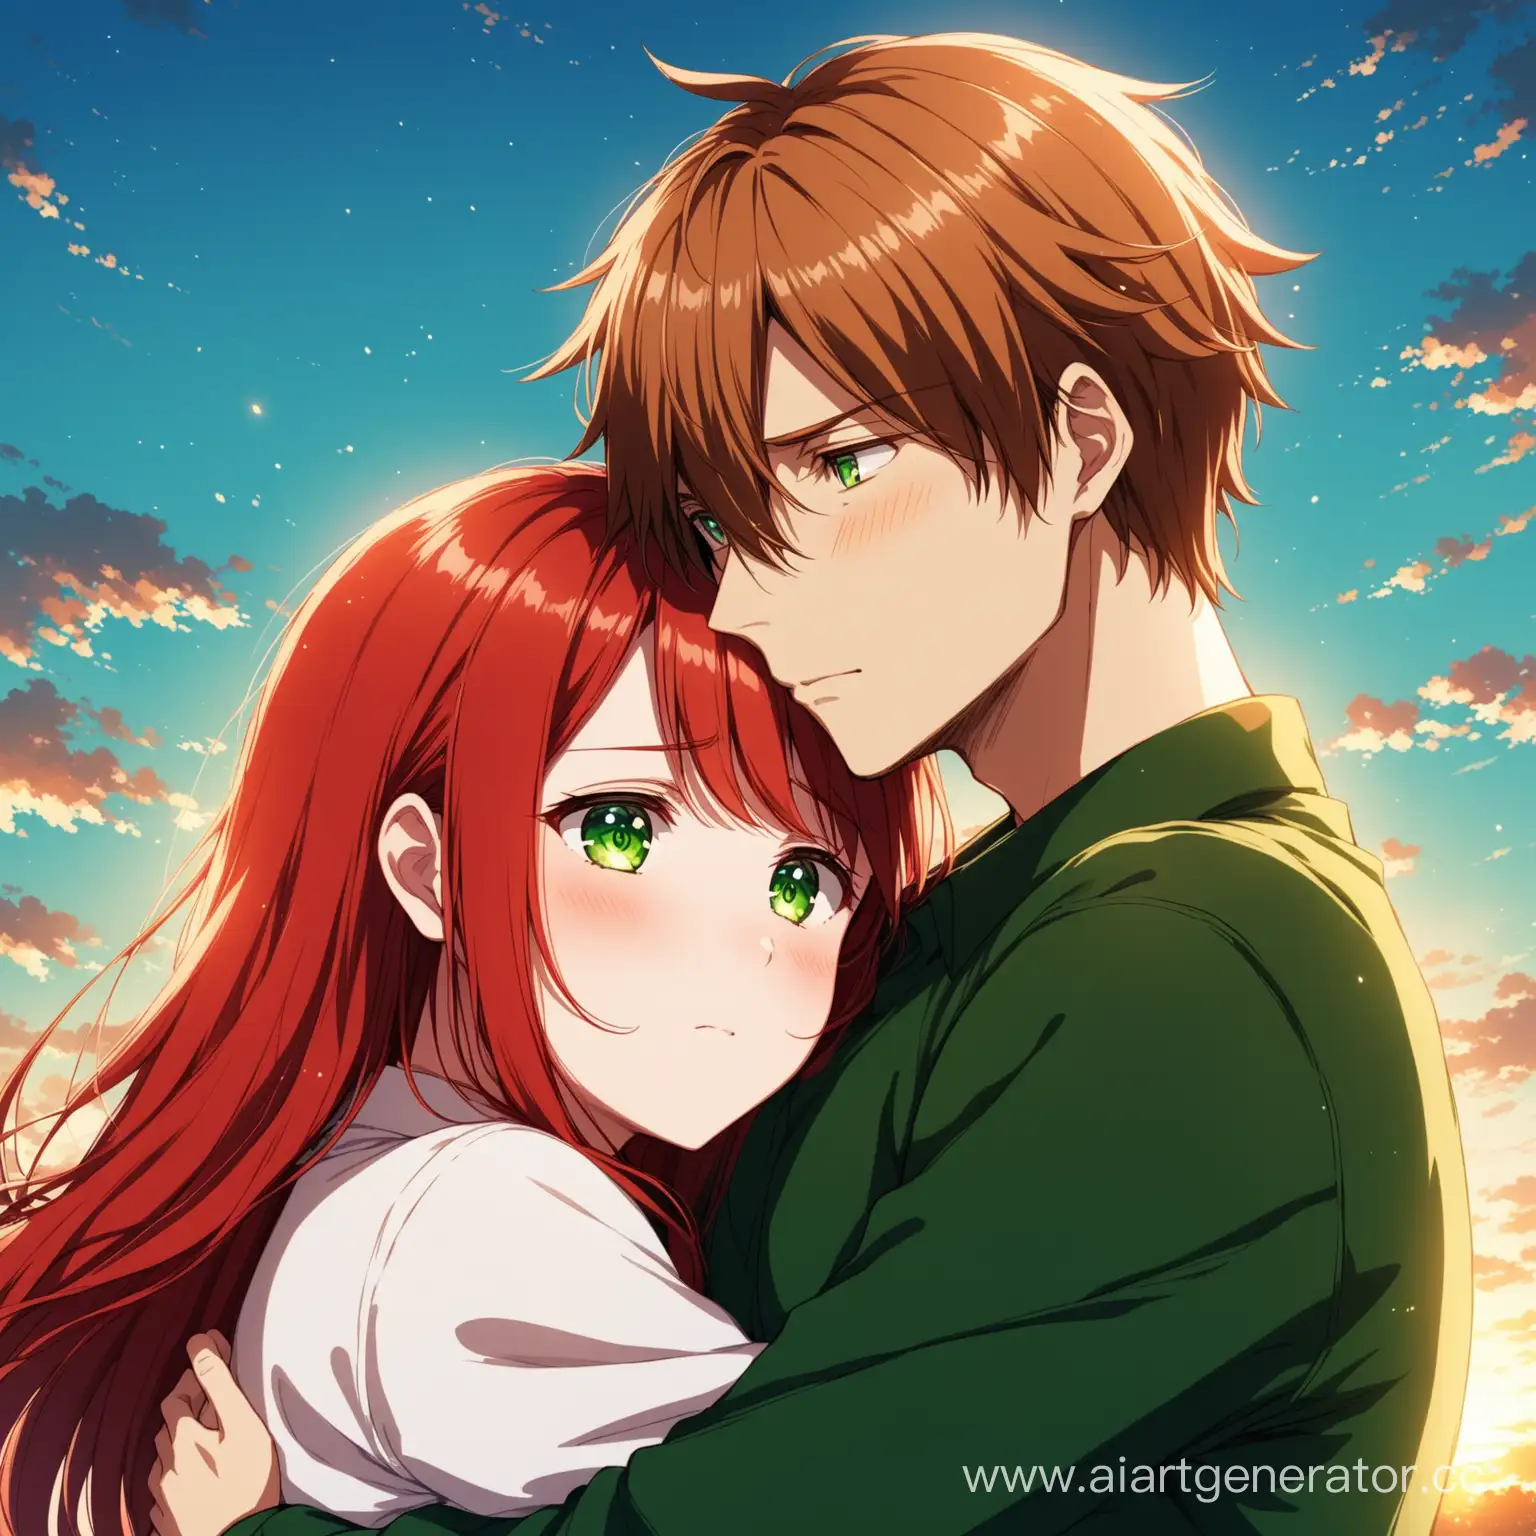 Anime-Sad-Guy-Embraces-RedHaired-Girl-with-Green-Eyes